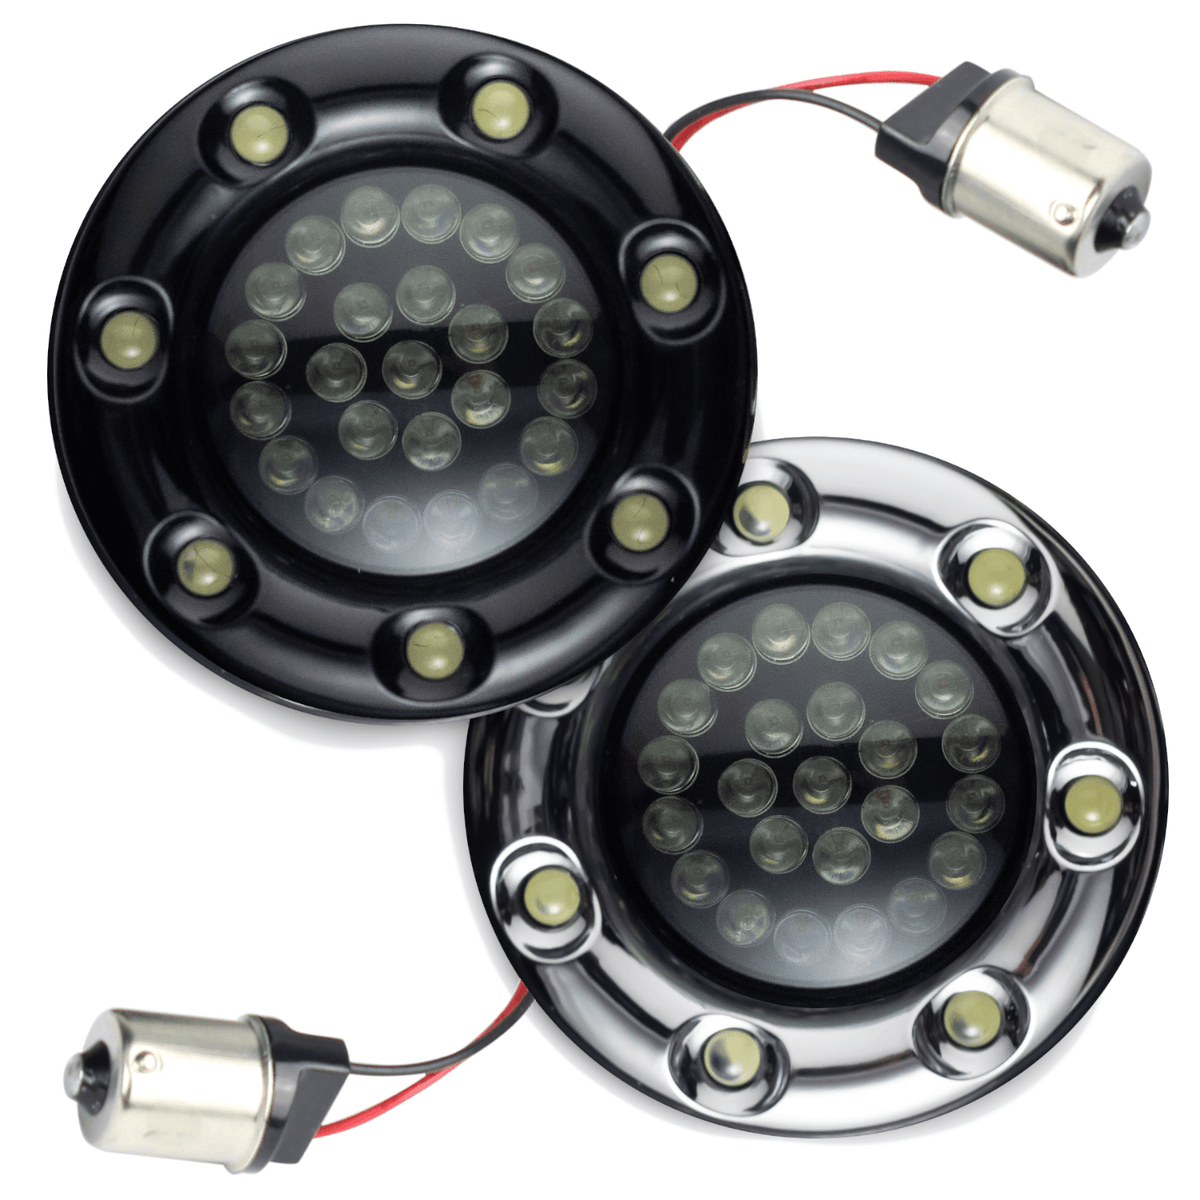 Eagle Lights Infinity Beam 2” Rear LED Turn Signals with LED Ring Covers for Harley Davidson - Rear 1156 / Red LEDs